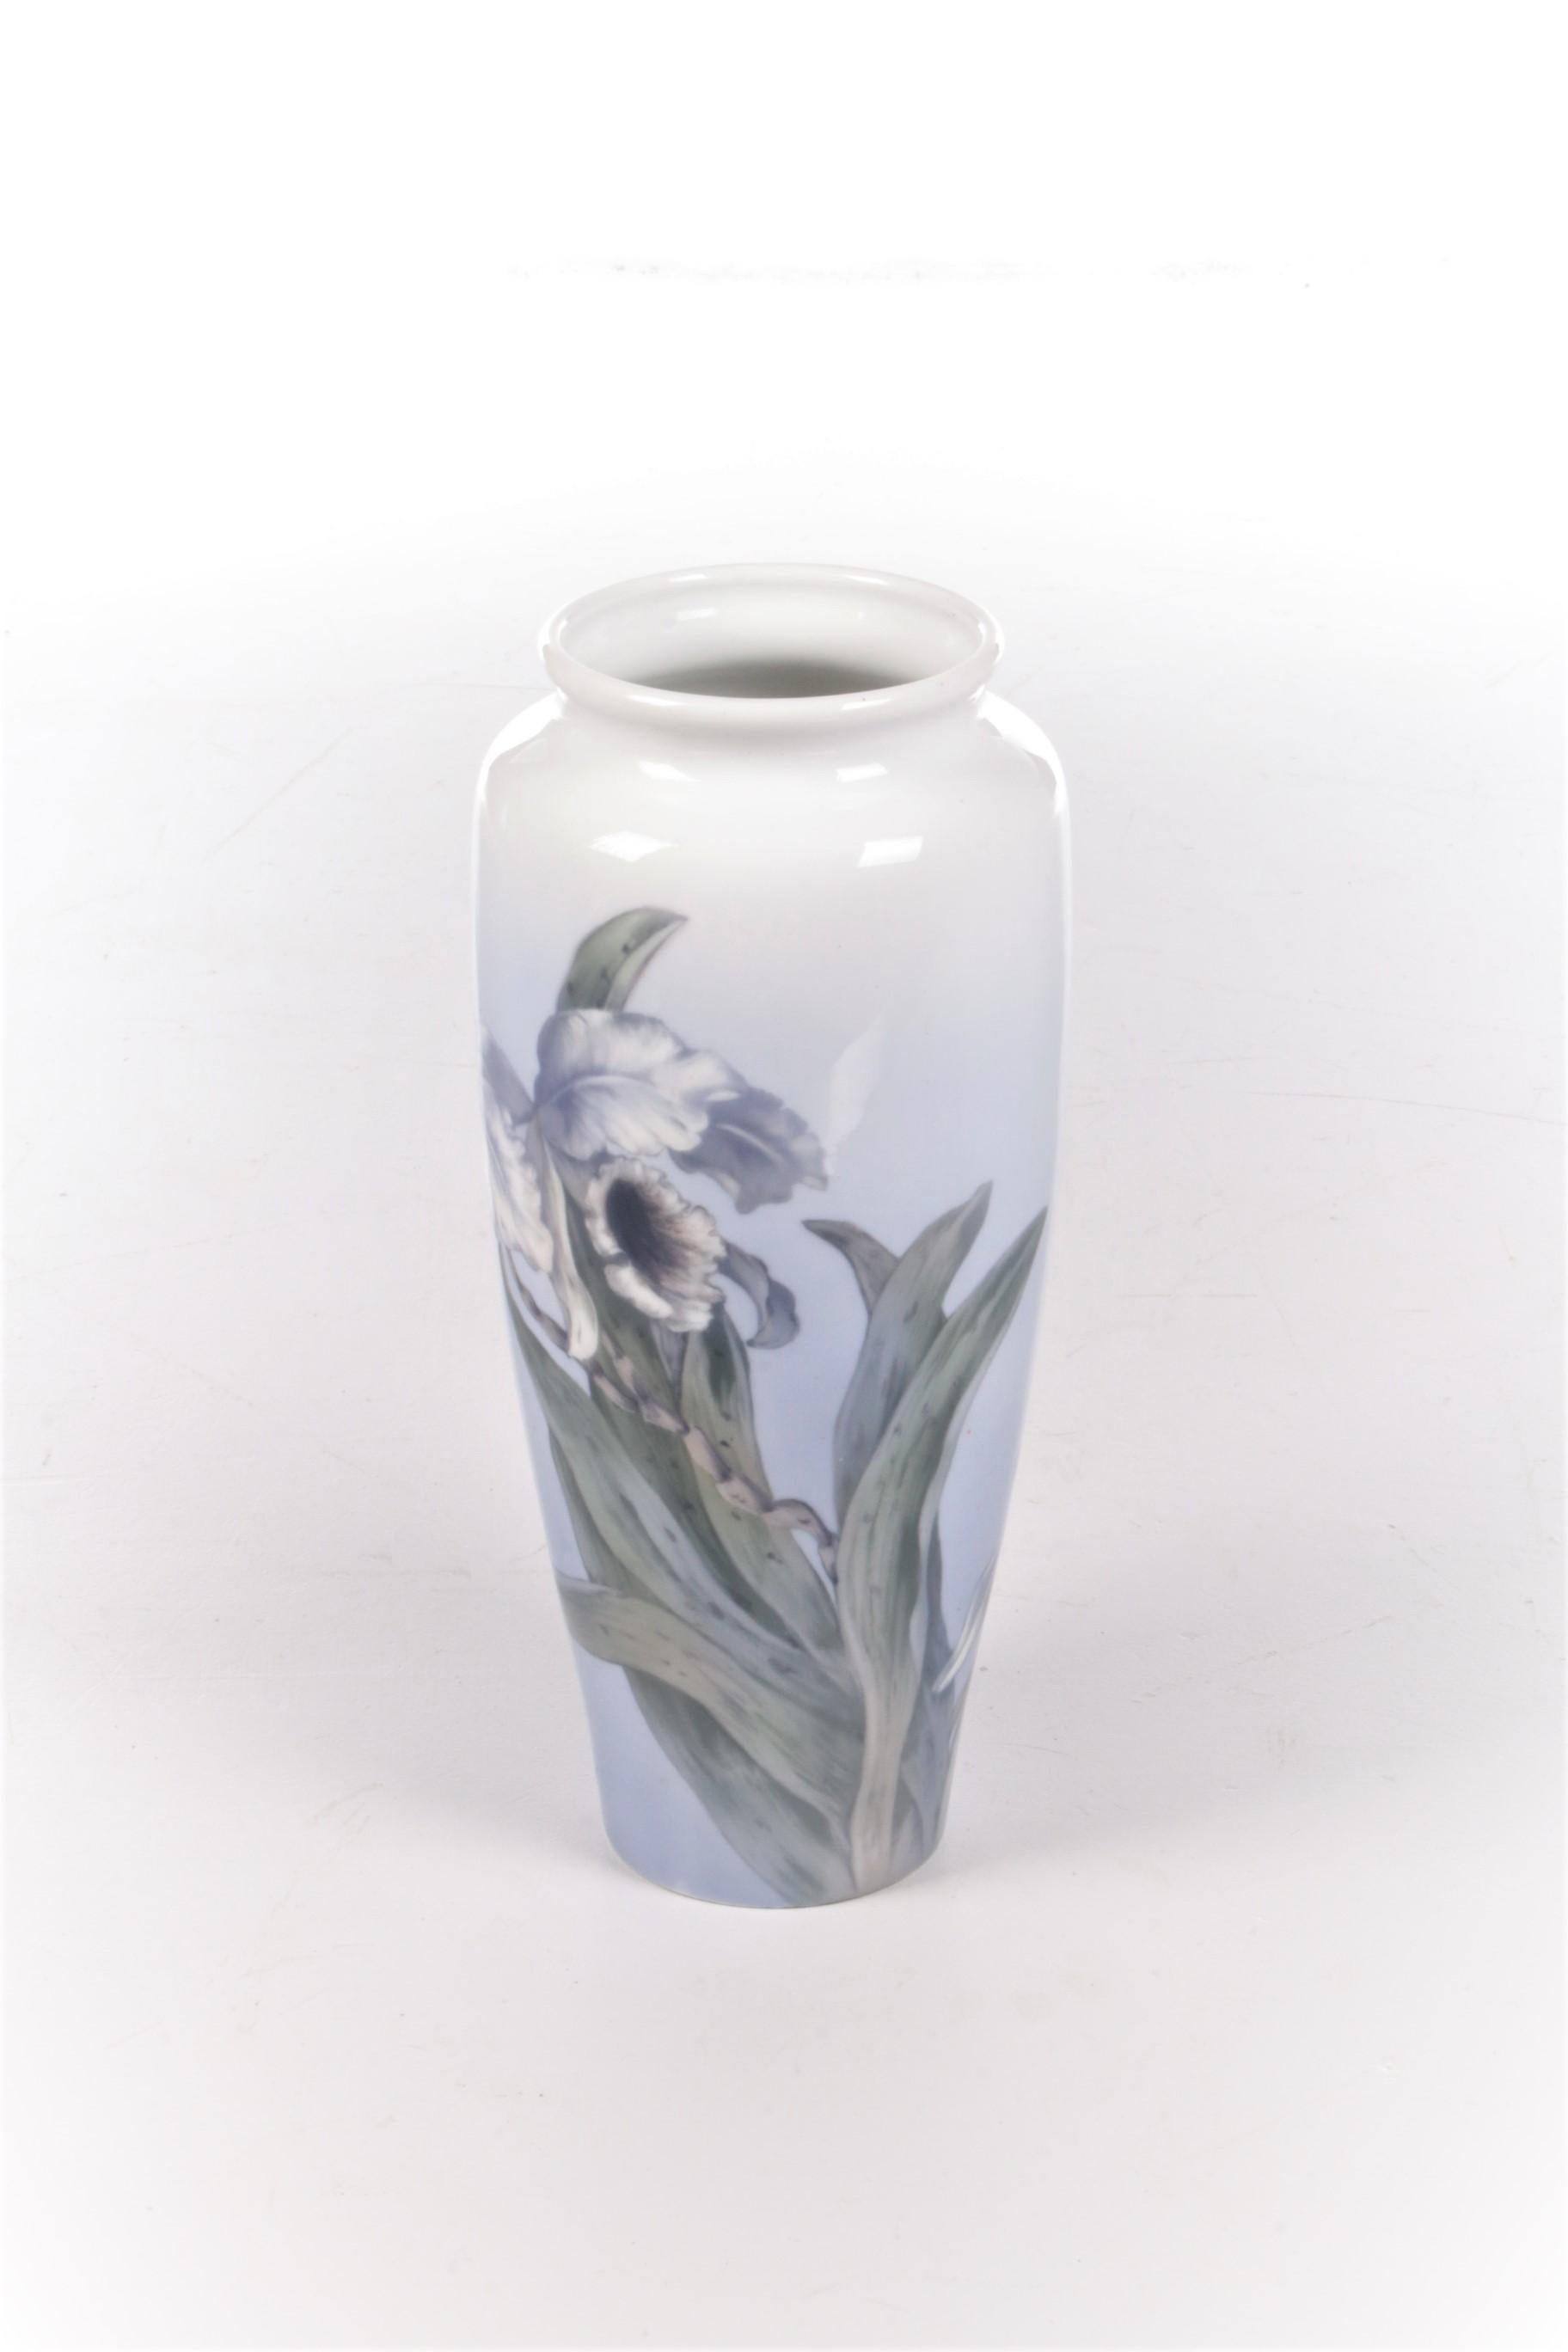 Royal Copenhagen Large Porcelain vase painted with the trumpet flower.


Producers of the best in Danish porcelain, Royal Copenhagen is a company steeped in tradition.

The famous blue and white porcelain patterns and the famous hallmark with